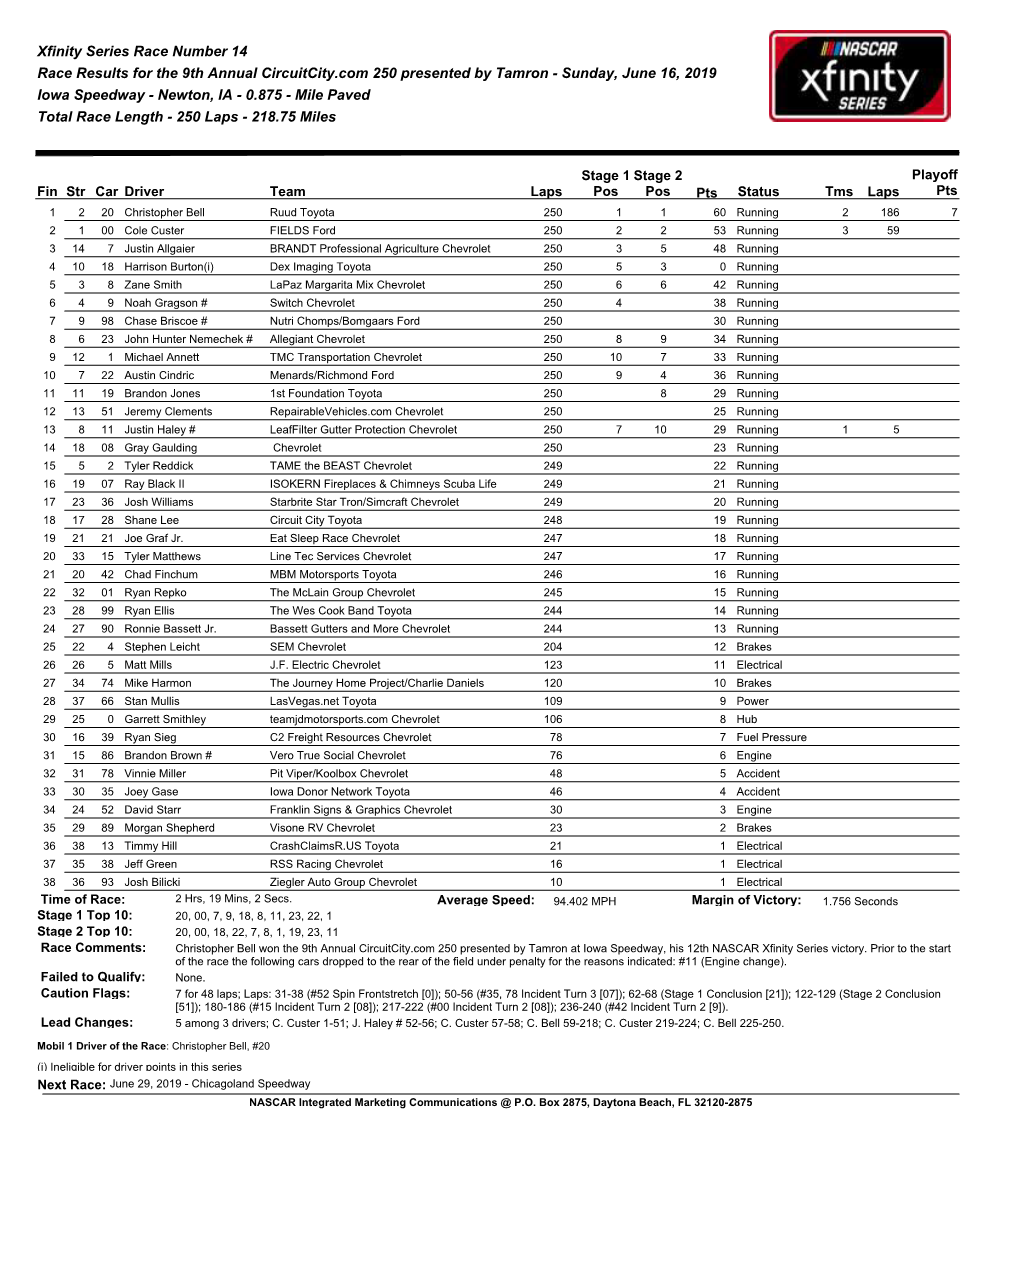 Xfinity Series Race Number 14 Race Results for the 9Th Annual